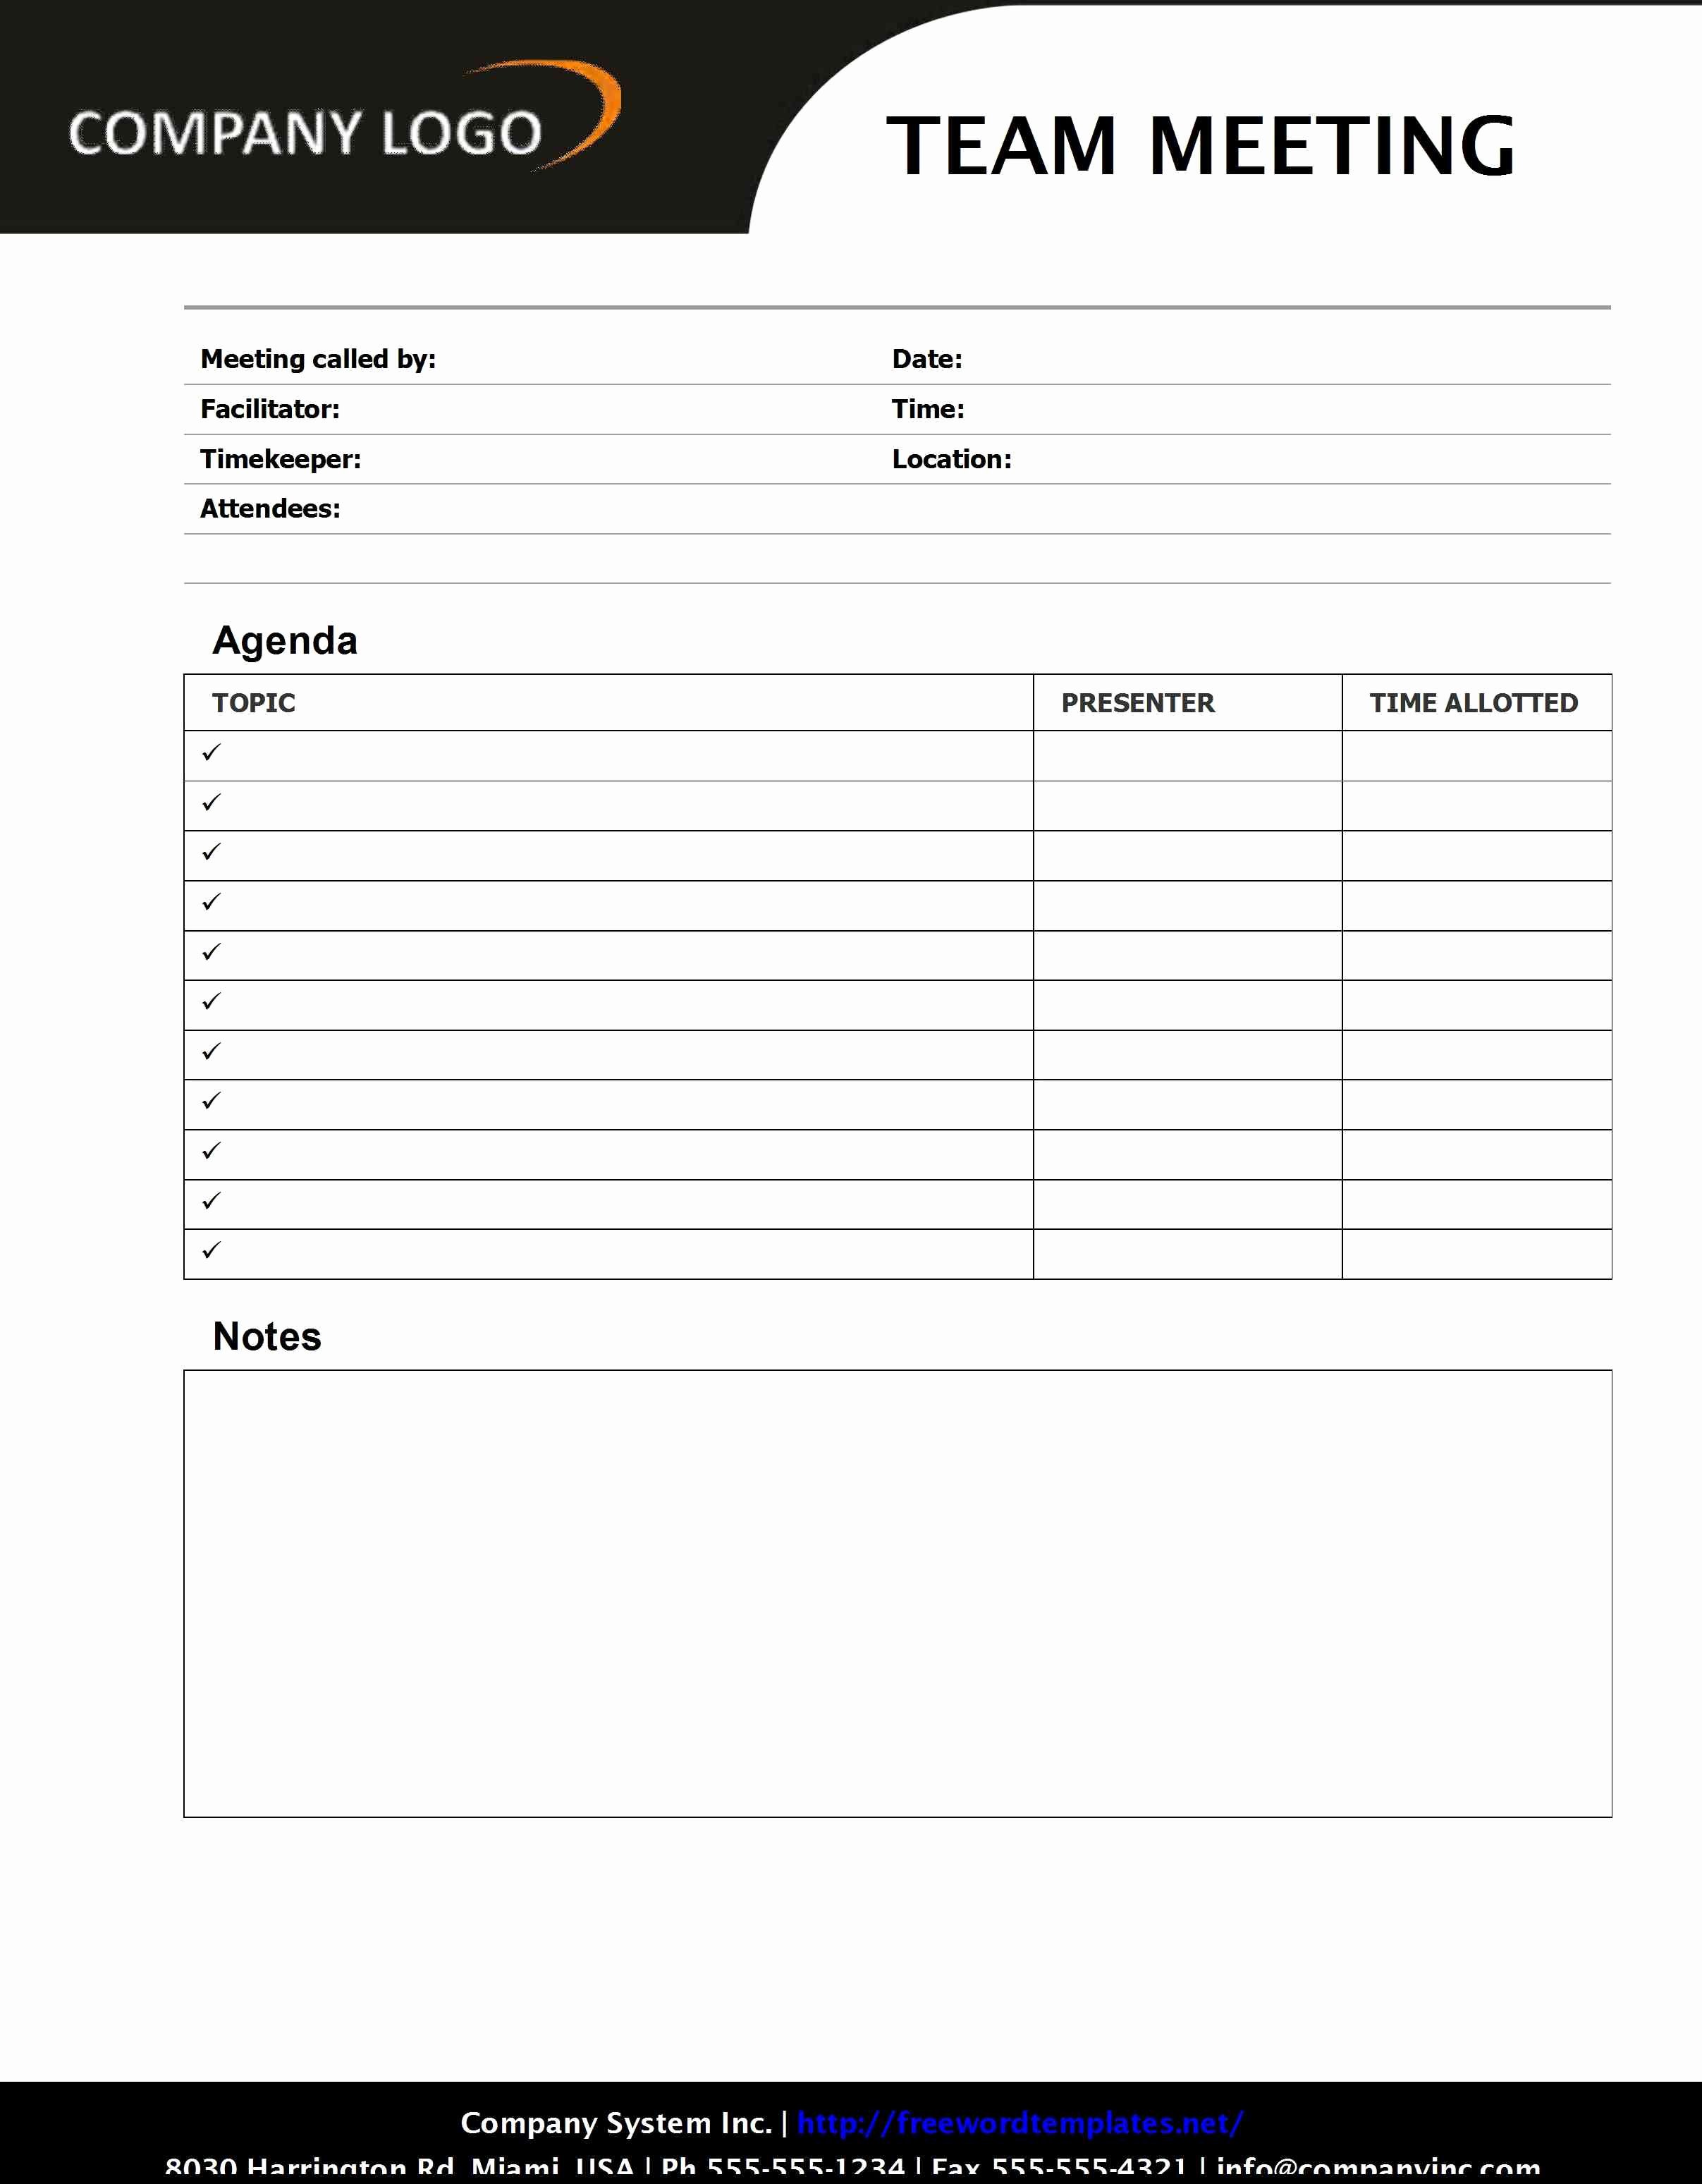 Free Agenda Templates for Word Lovely Team Meeting Agenda Sd1 Style